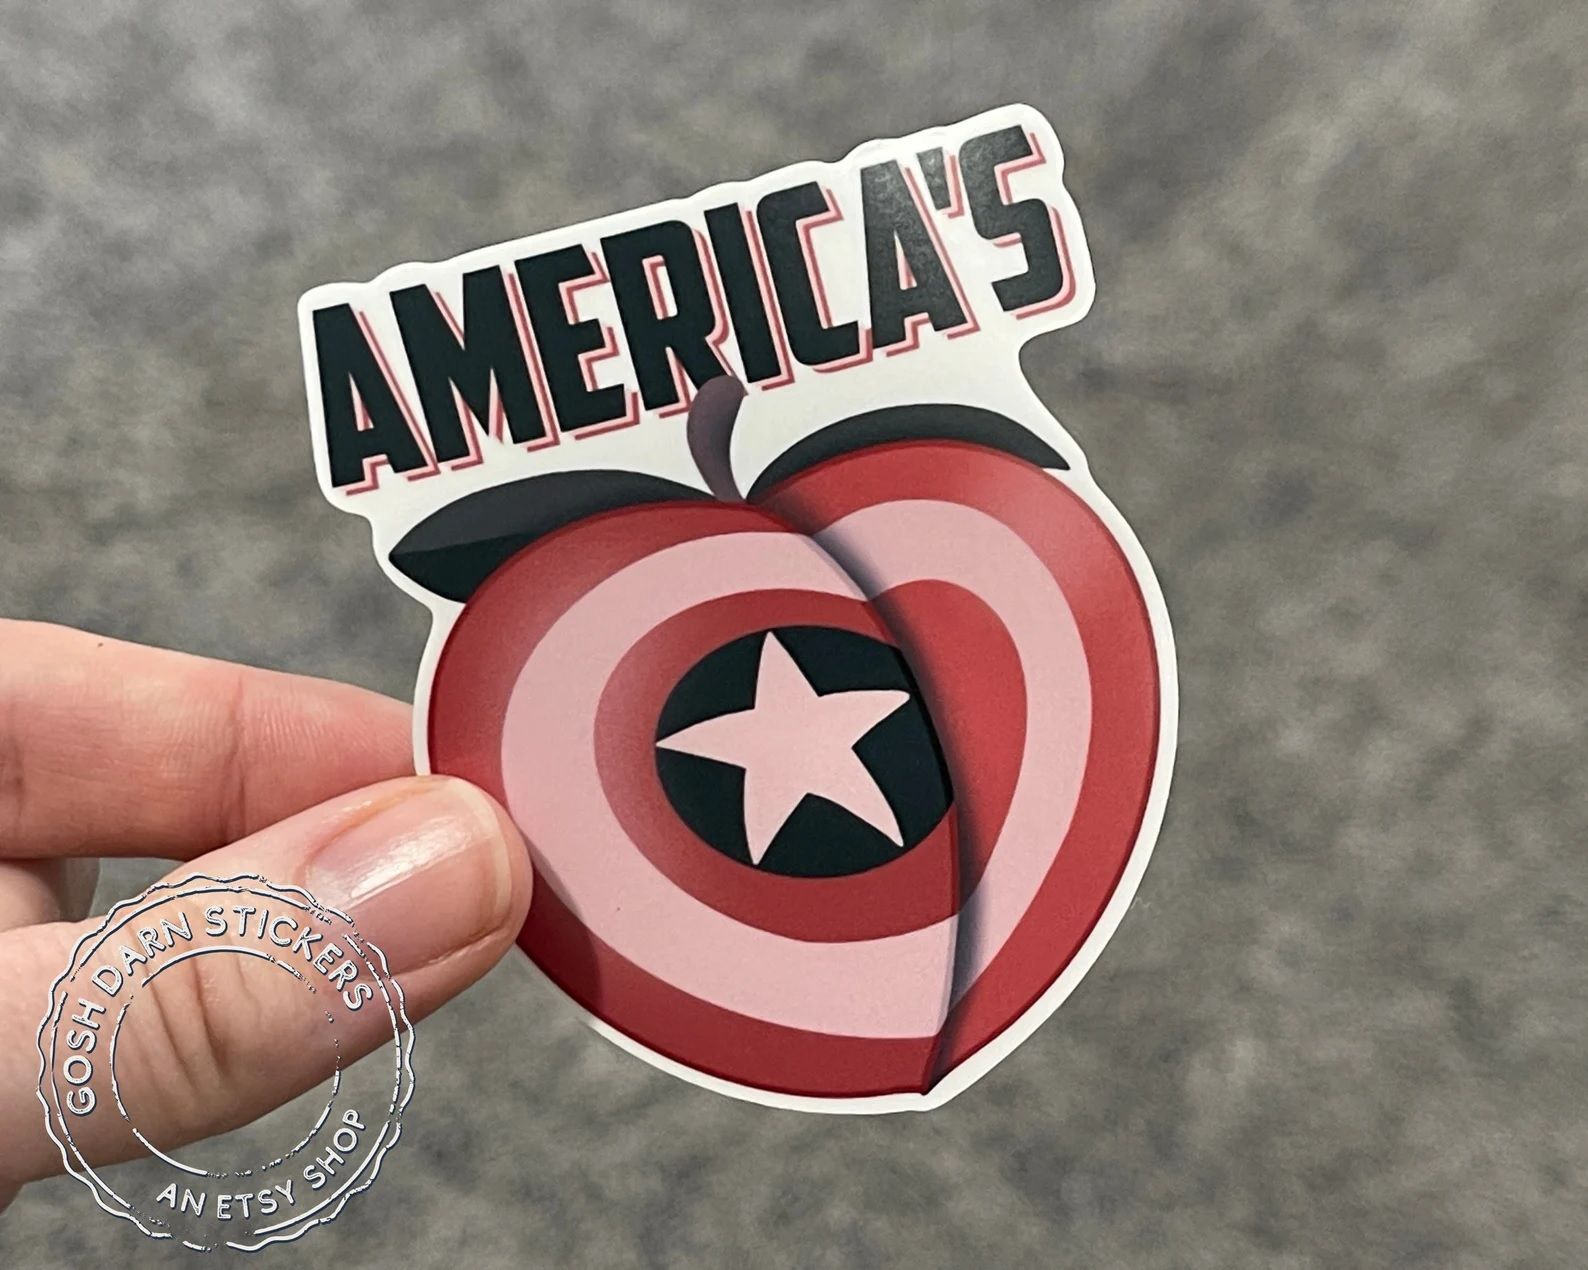 A sticker of a peach-shaped Captain America shield with the word "America's" written in capital letters above